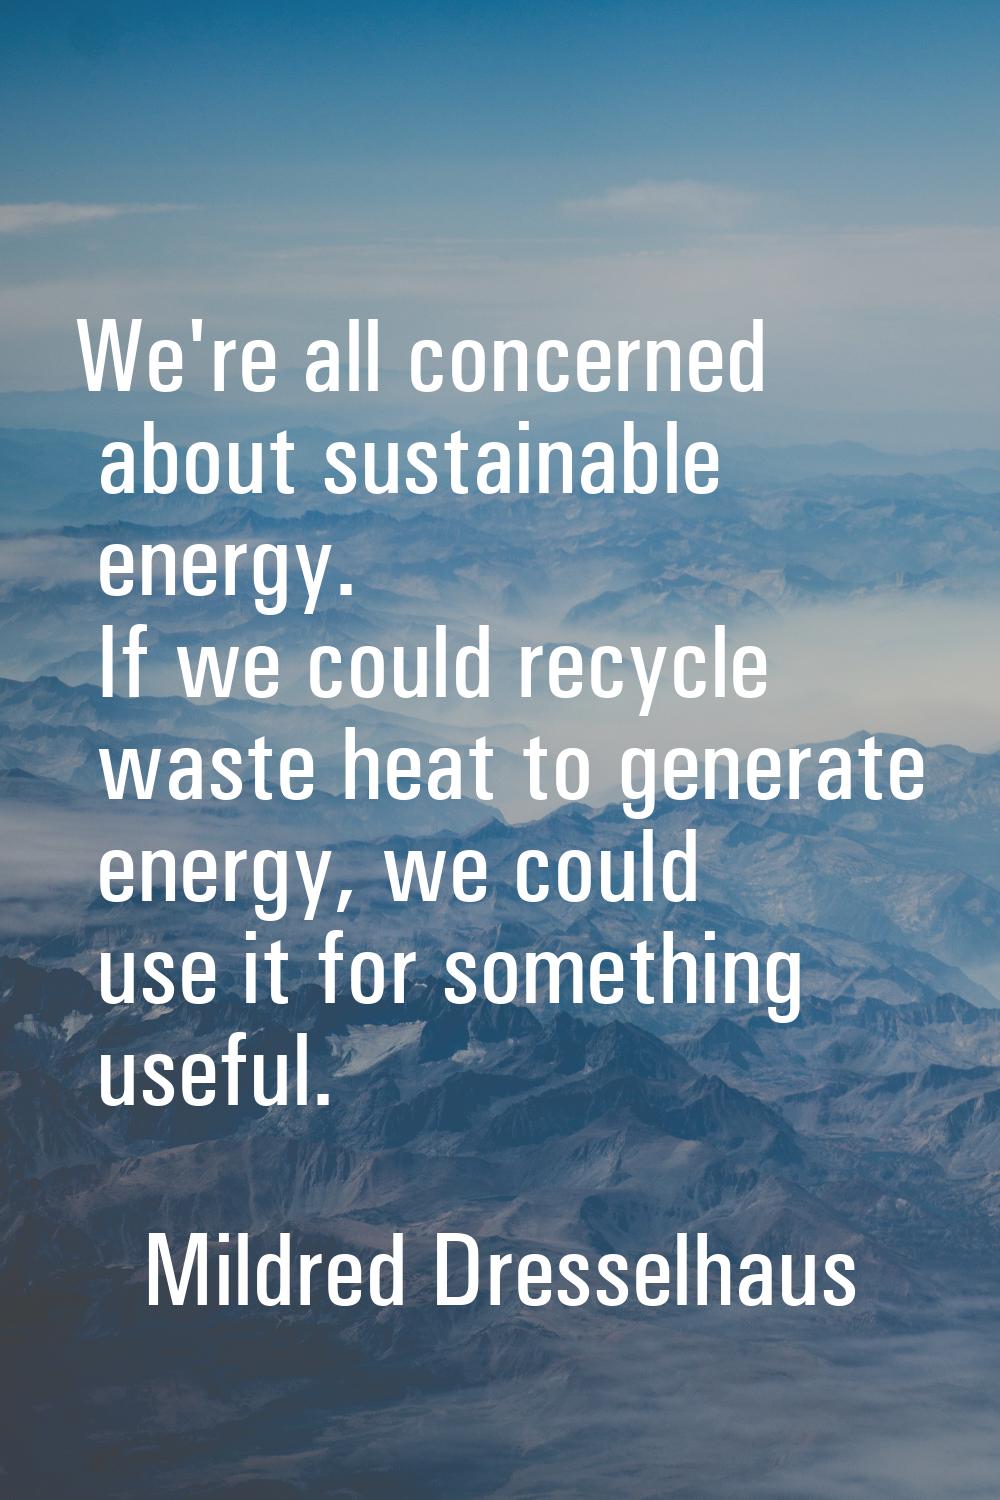 We're all concerned about sustainable energy. If we could recycle waste heat to generate energy, we